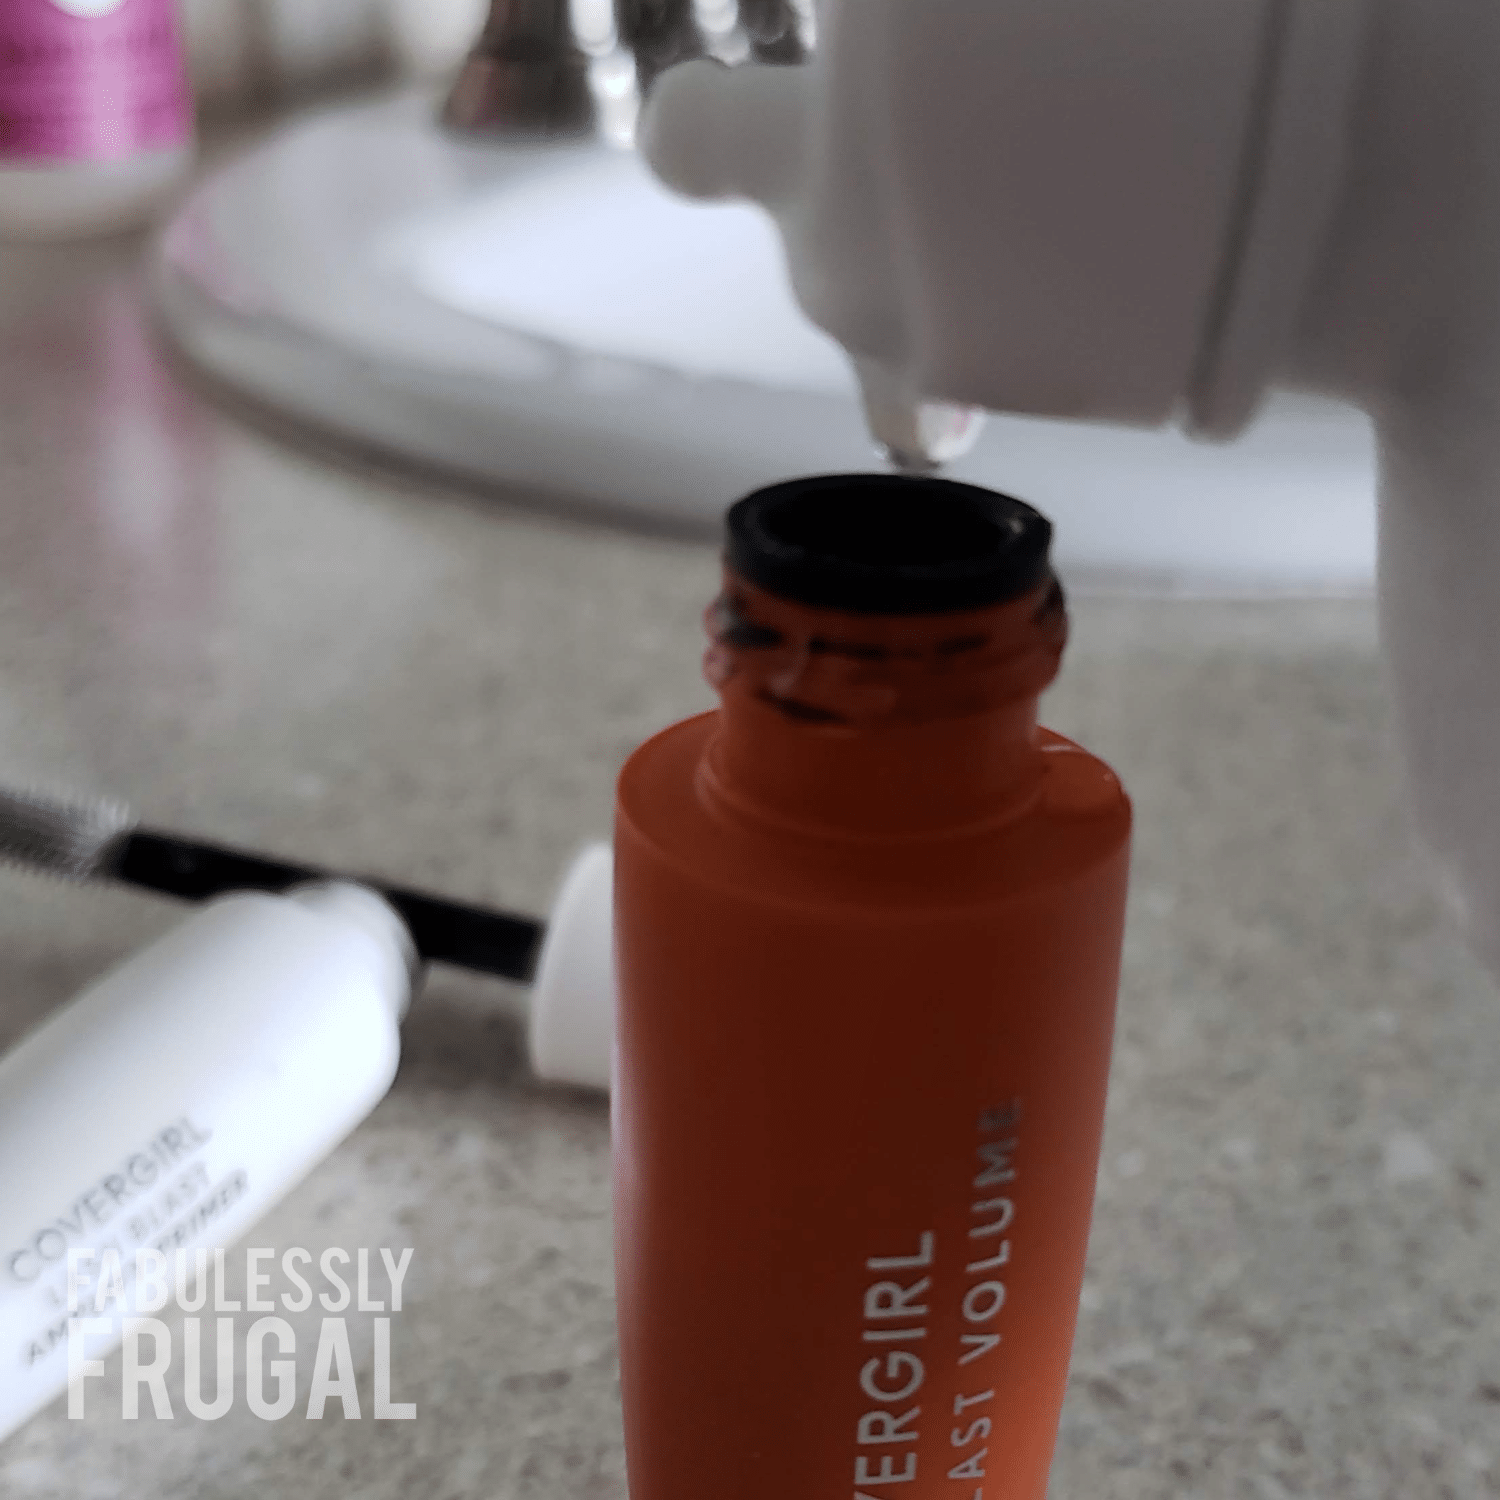 What to put in mascara to make it last longer